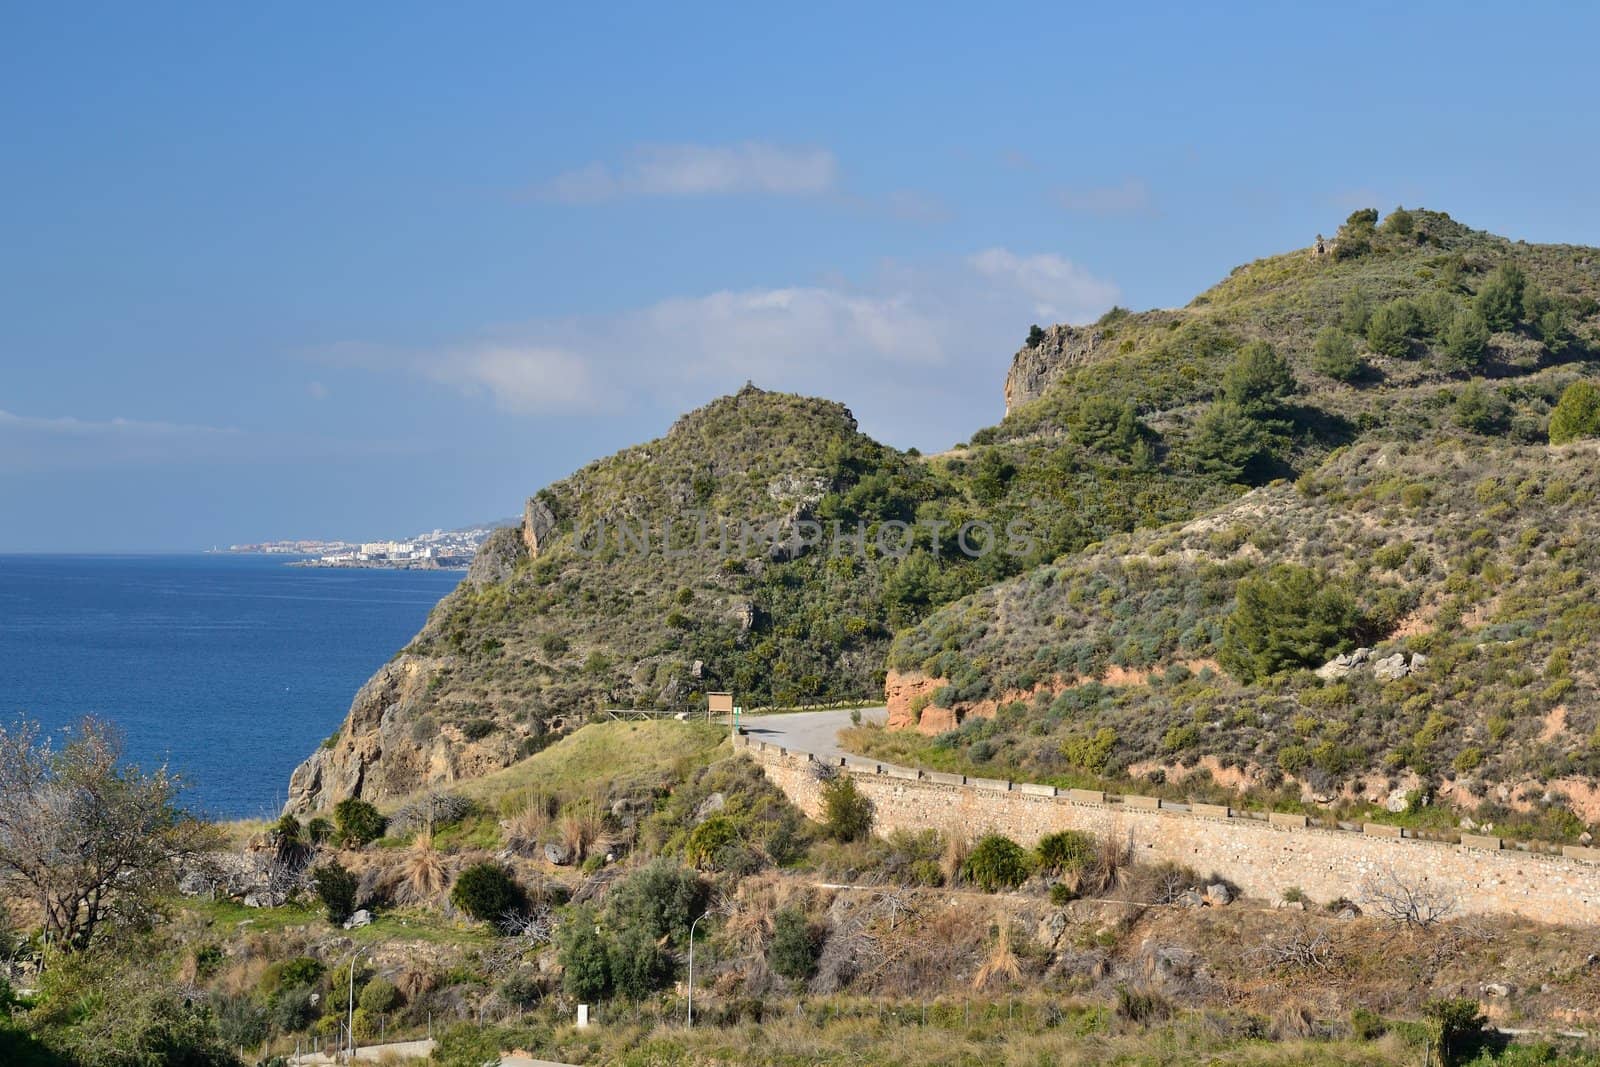 view from the mountain road leading over the city Nerja